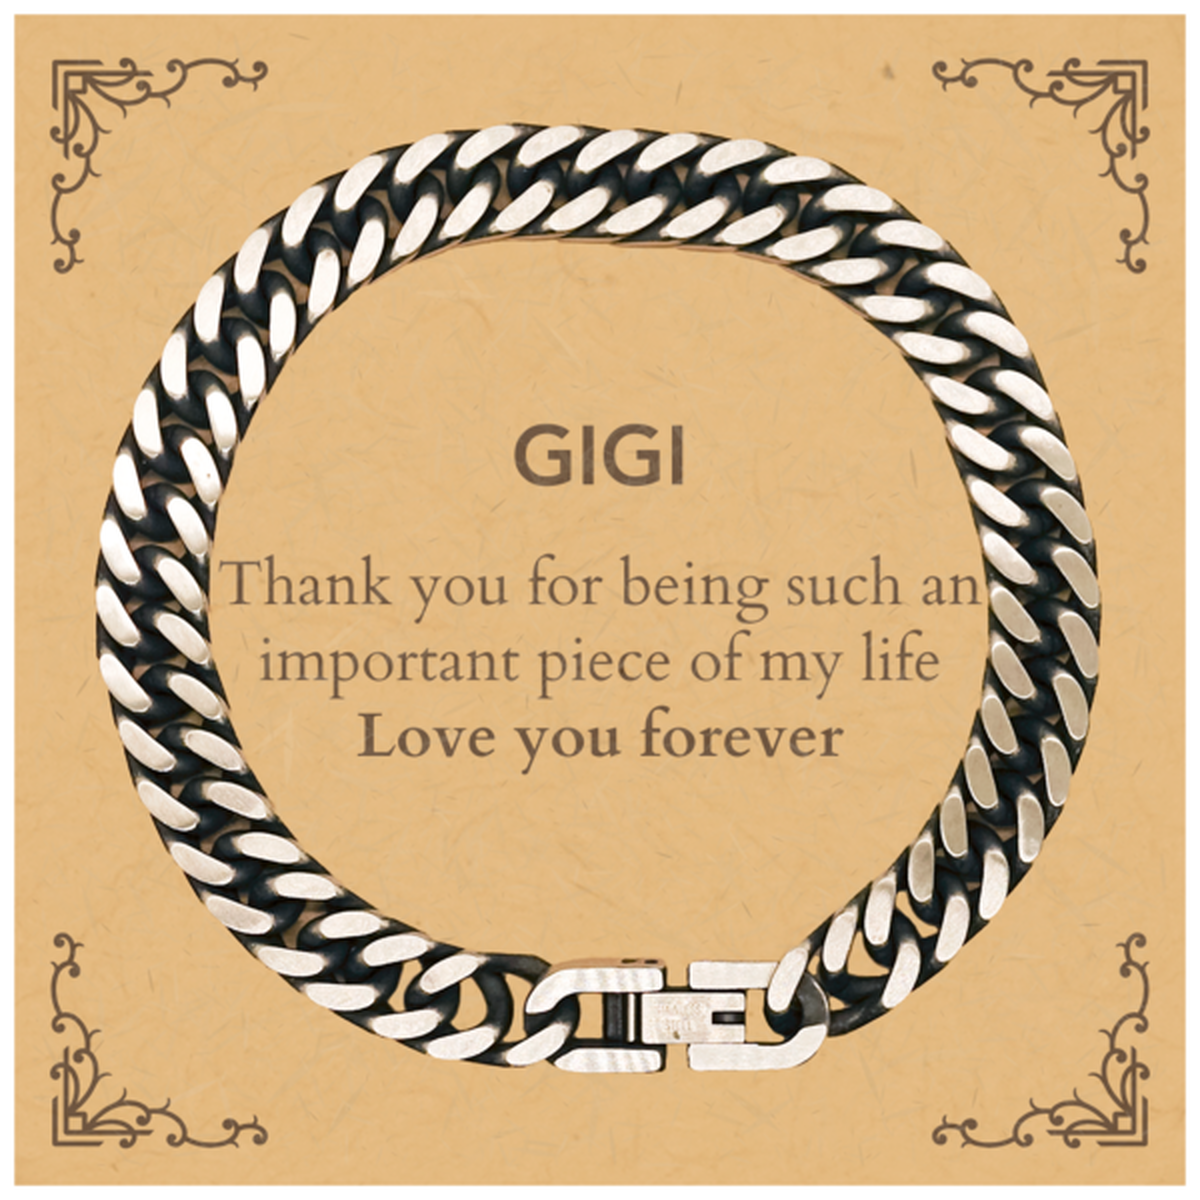 Appropriate Gigi Cuban Link Chain Bracelet Epic Birthday Gifts for Gigi Thank you for being such an important piece of my life Gigi Christmas Mothers Fathers Day